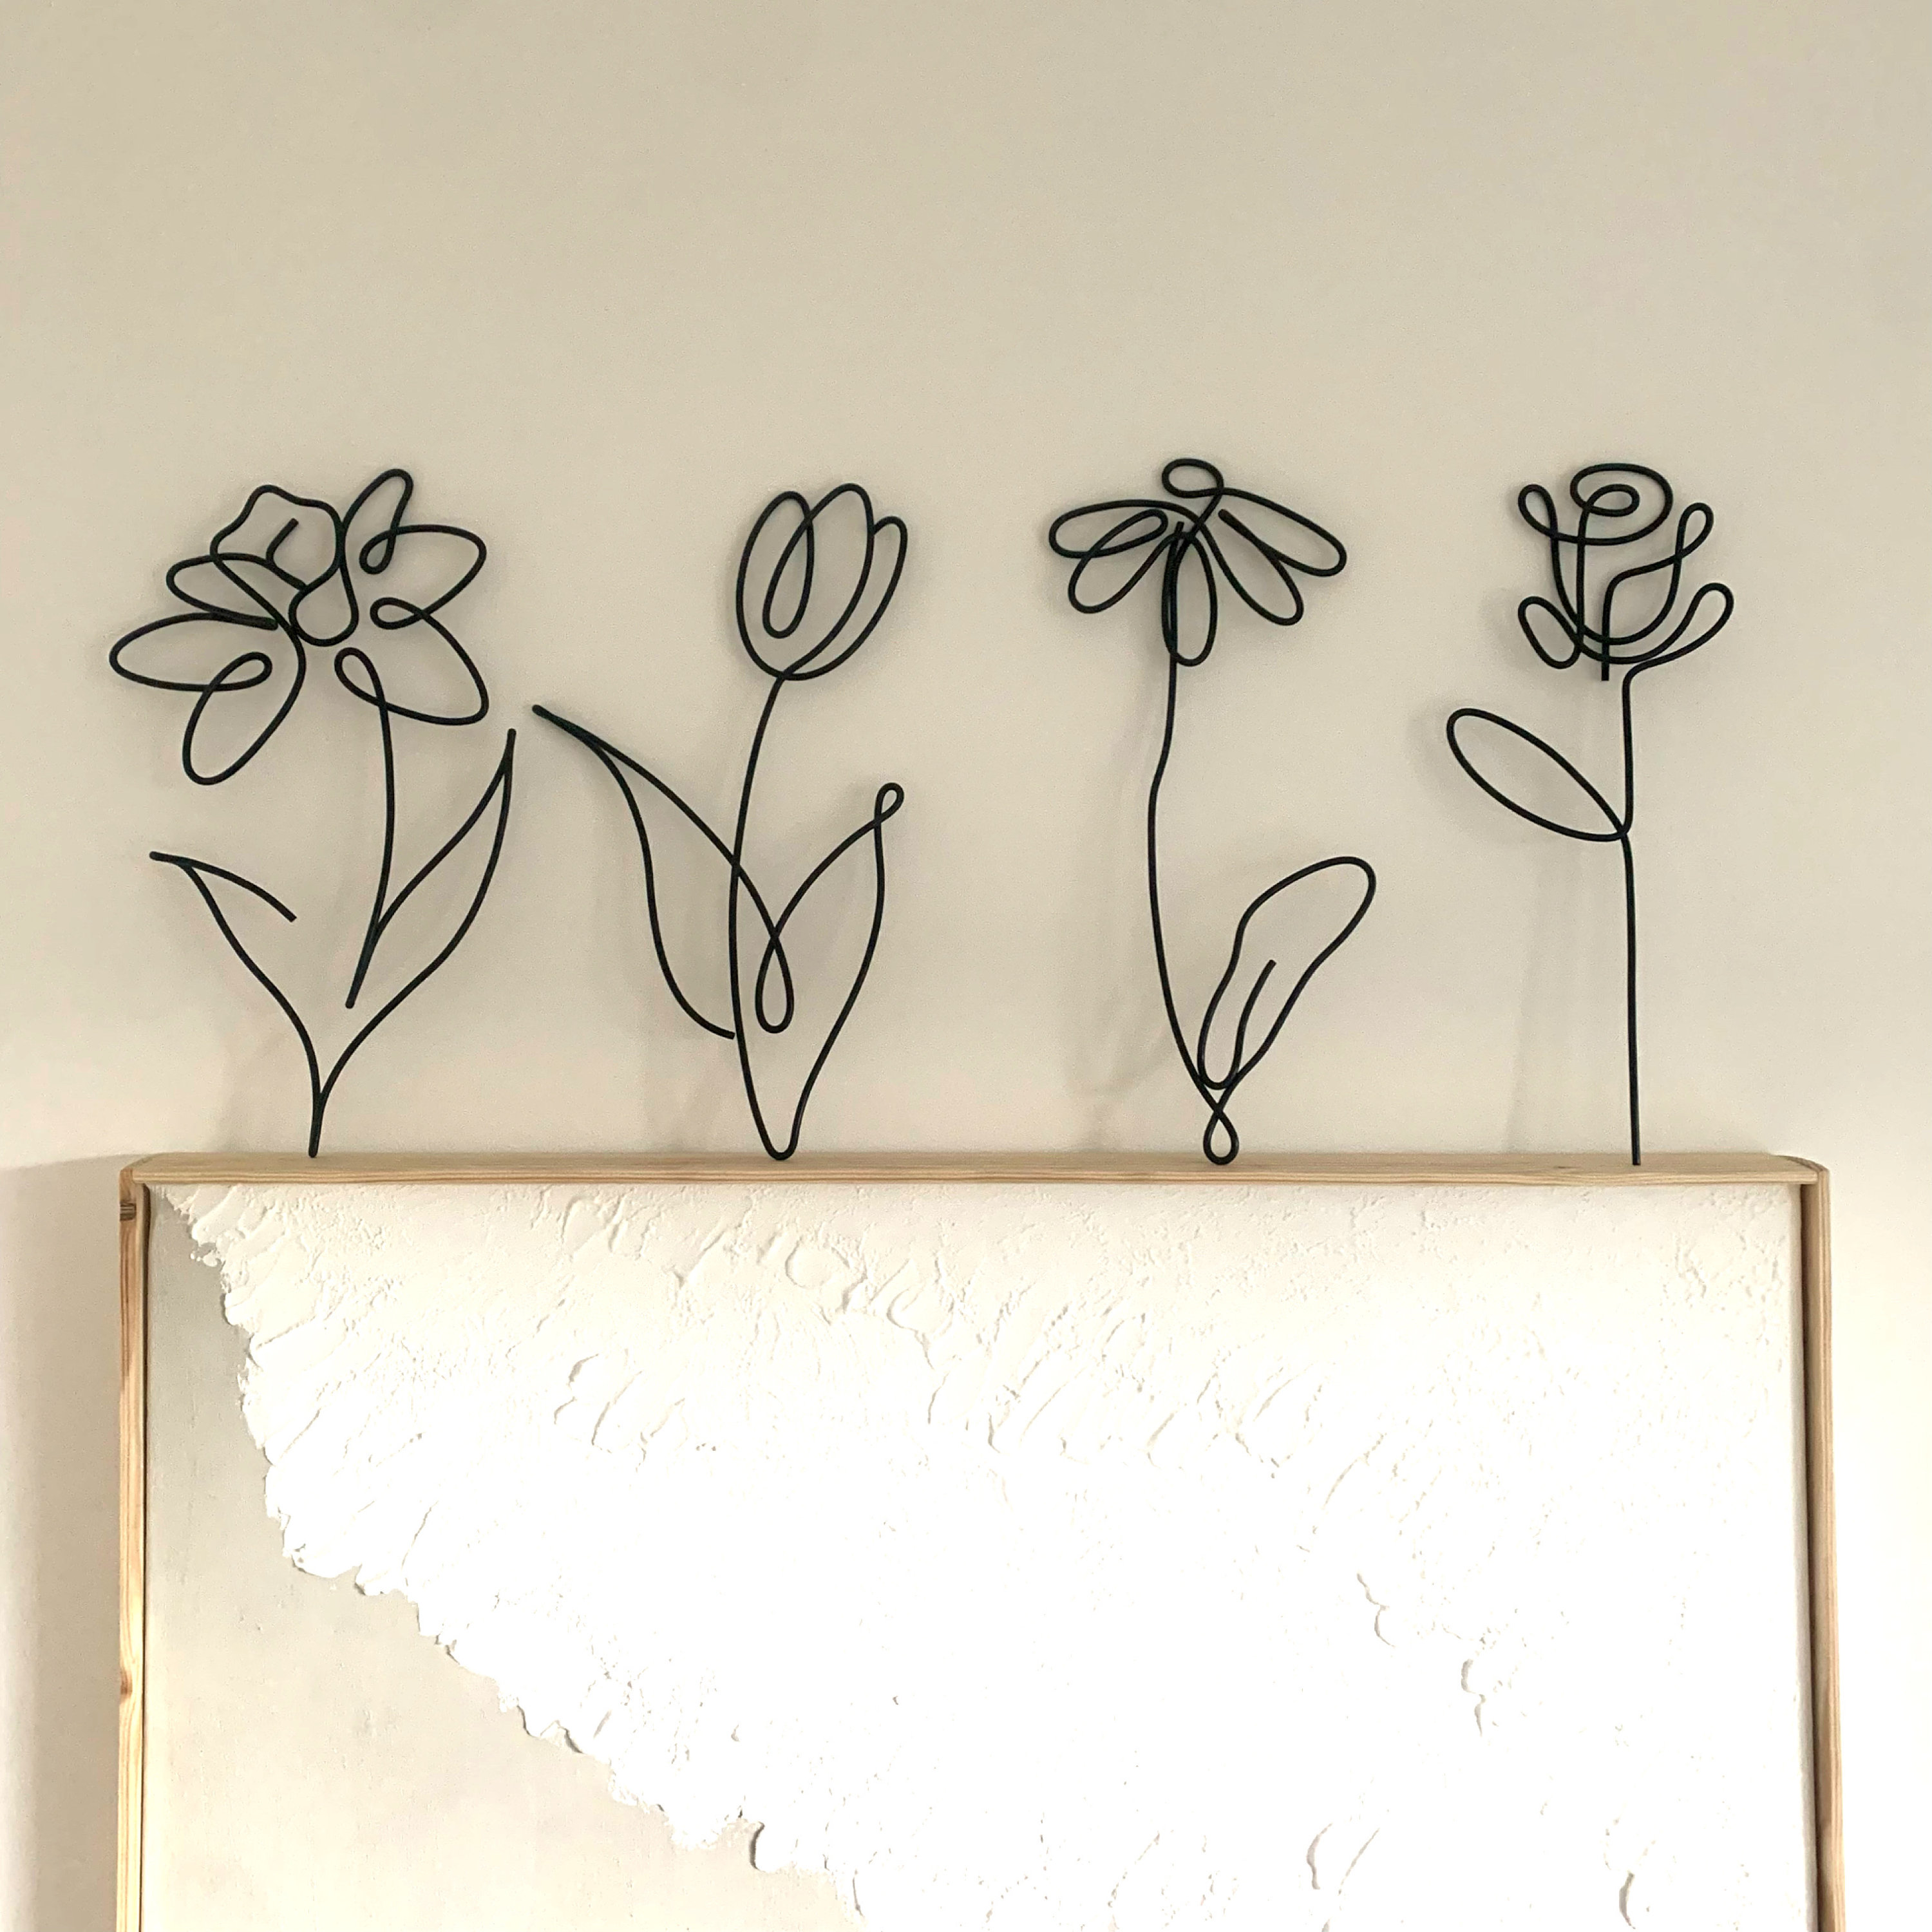 Daffodil Daisy Rose Lily Wild Flowers Wire Words Wire Wall Art Minimalist  Art Wall Decor Flower Wall Decor Unique Wall Hanging 